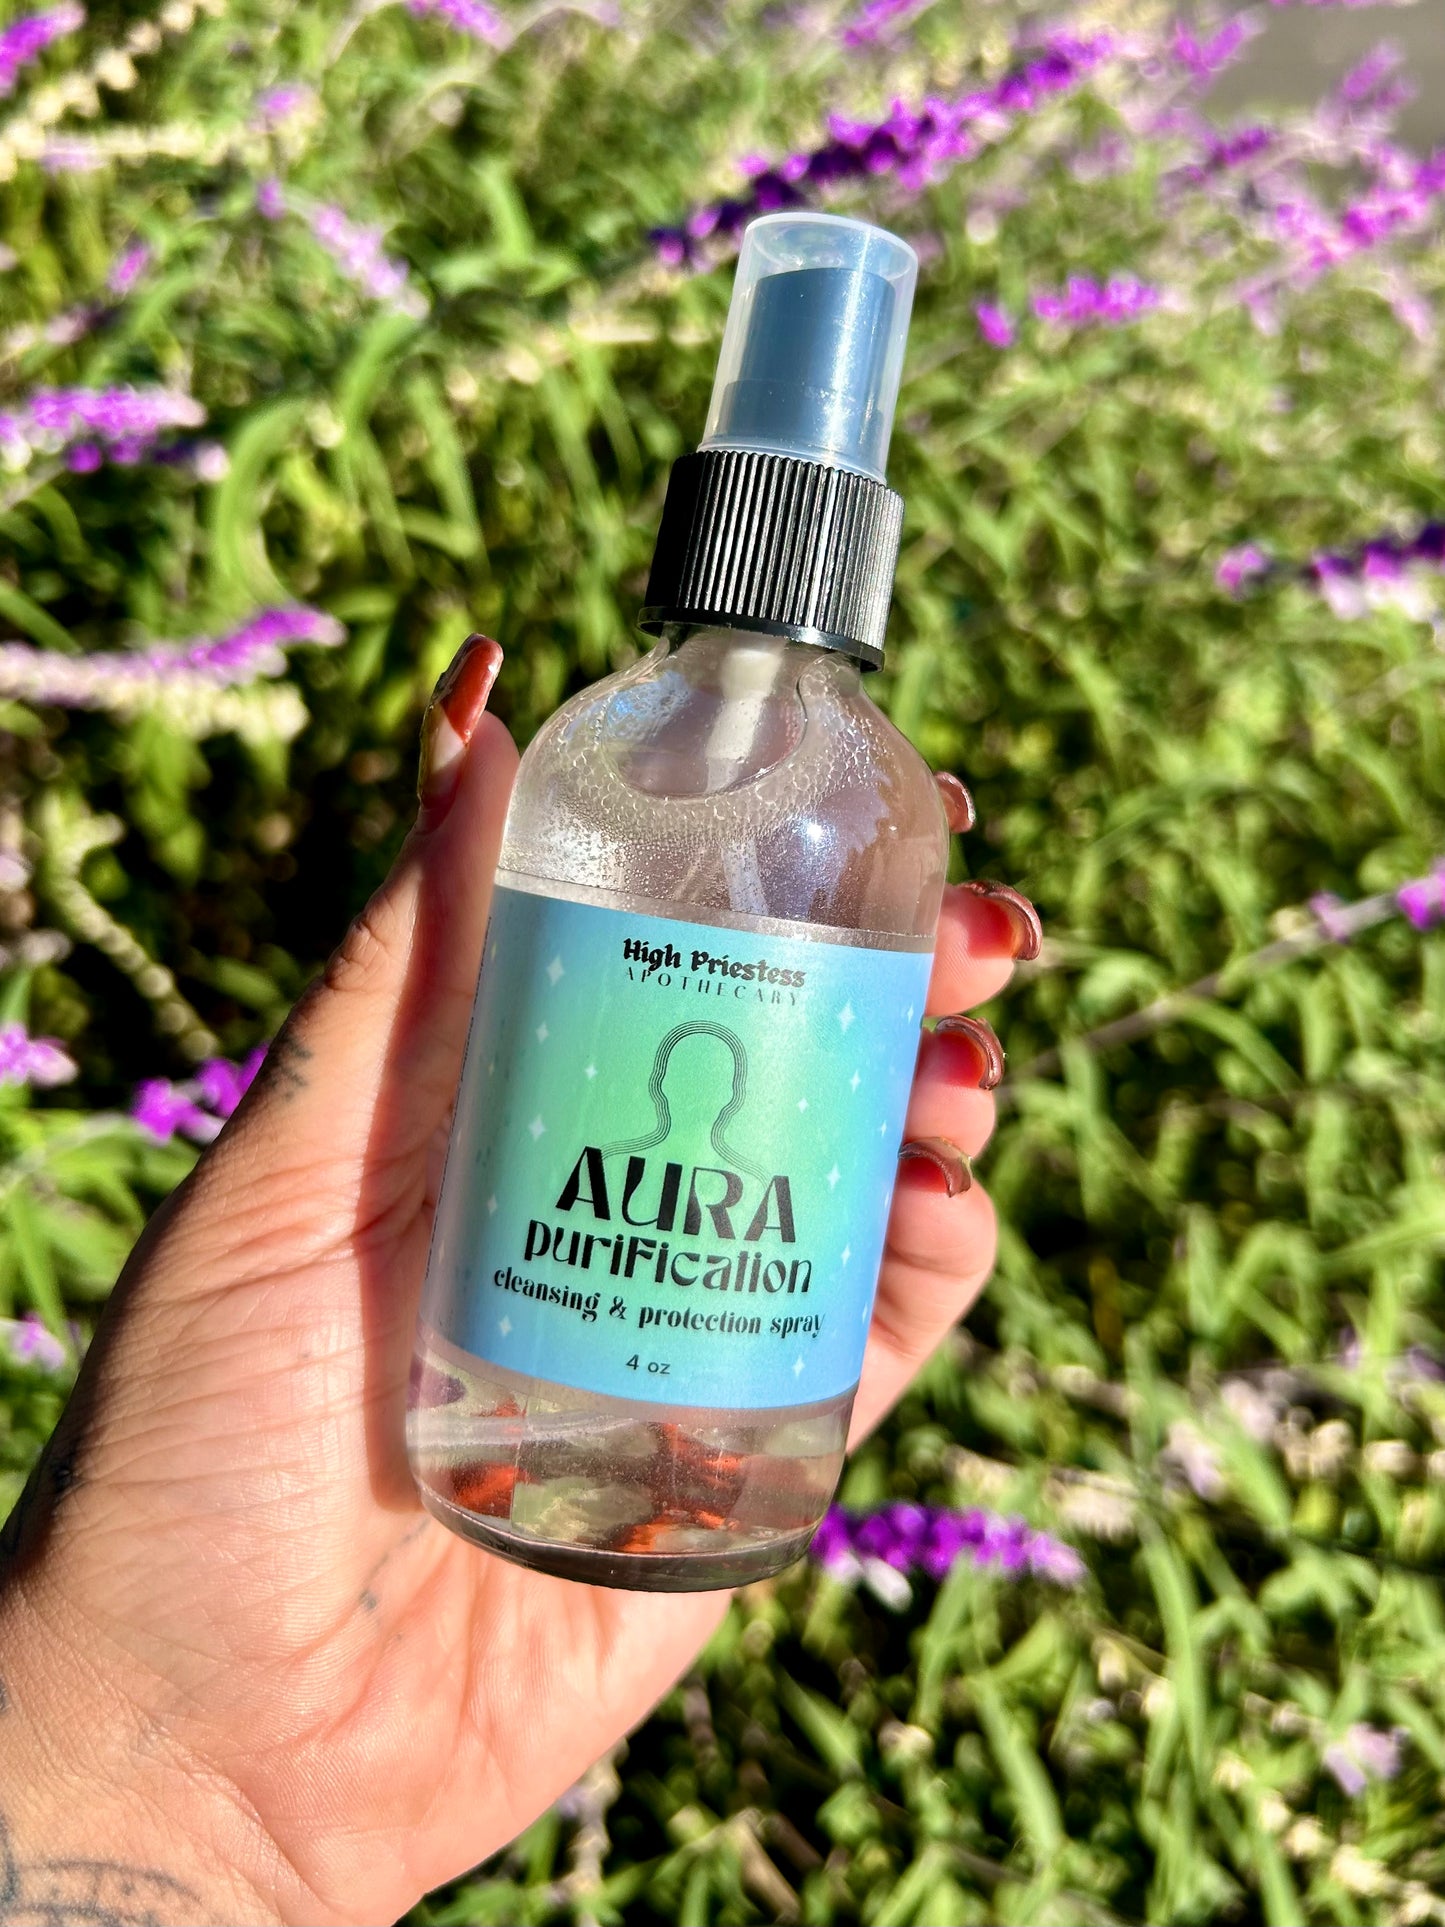 Aura Purification Cleansing & Protection Spray